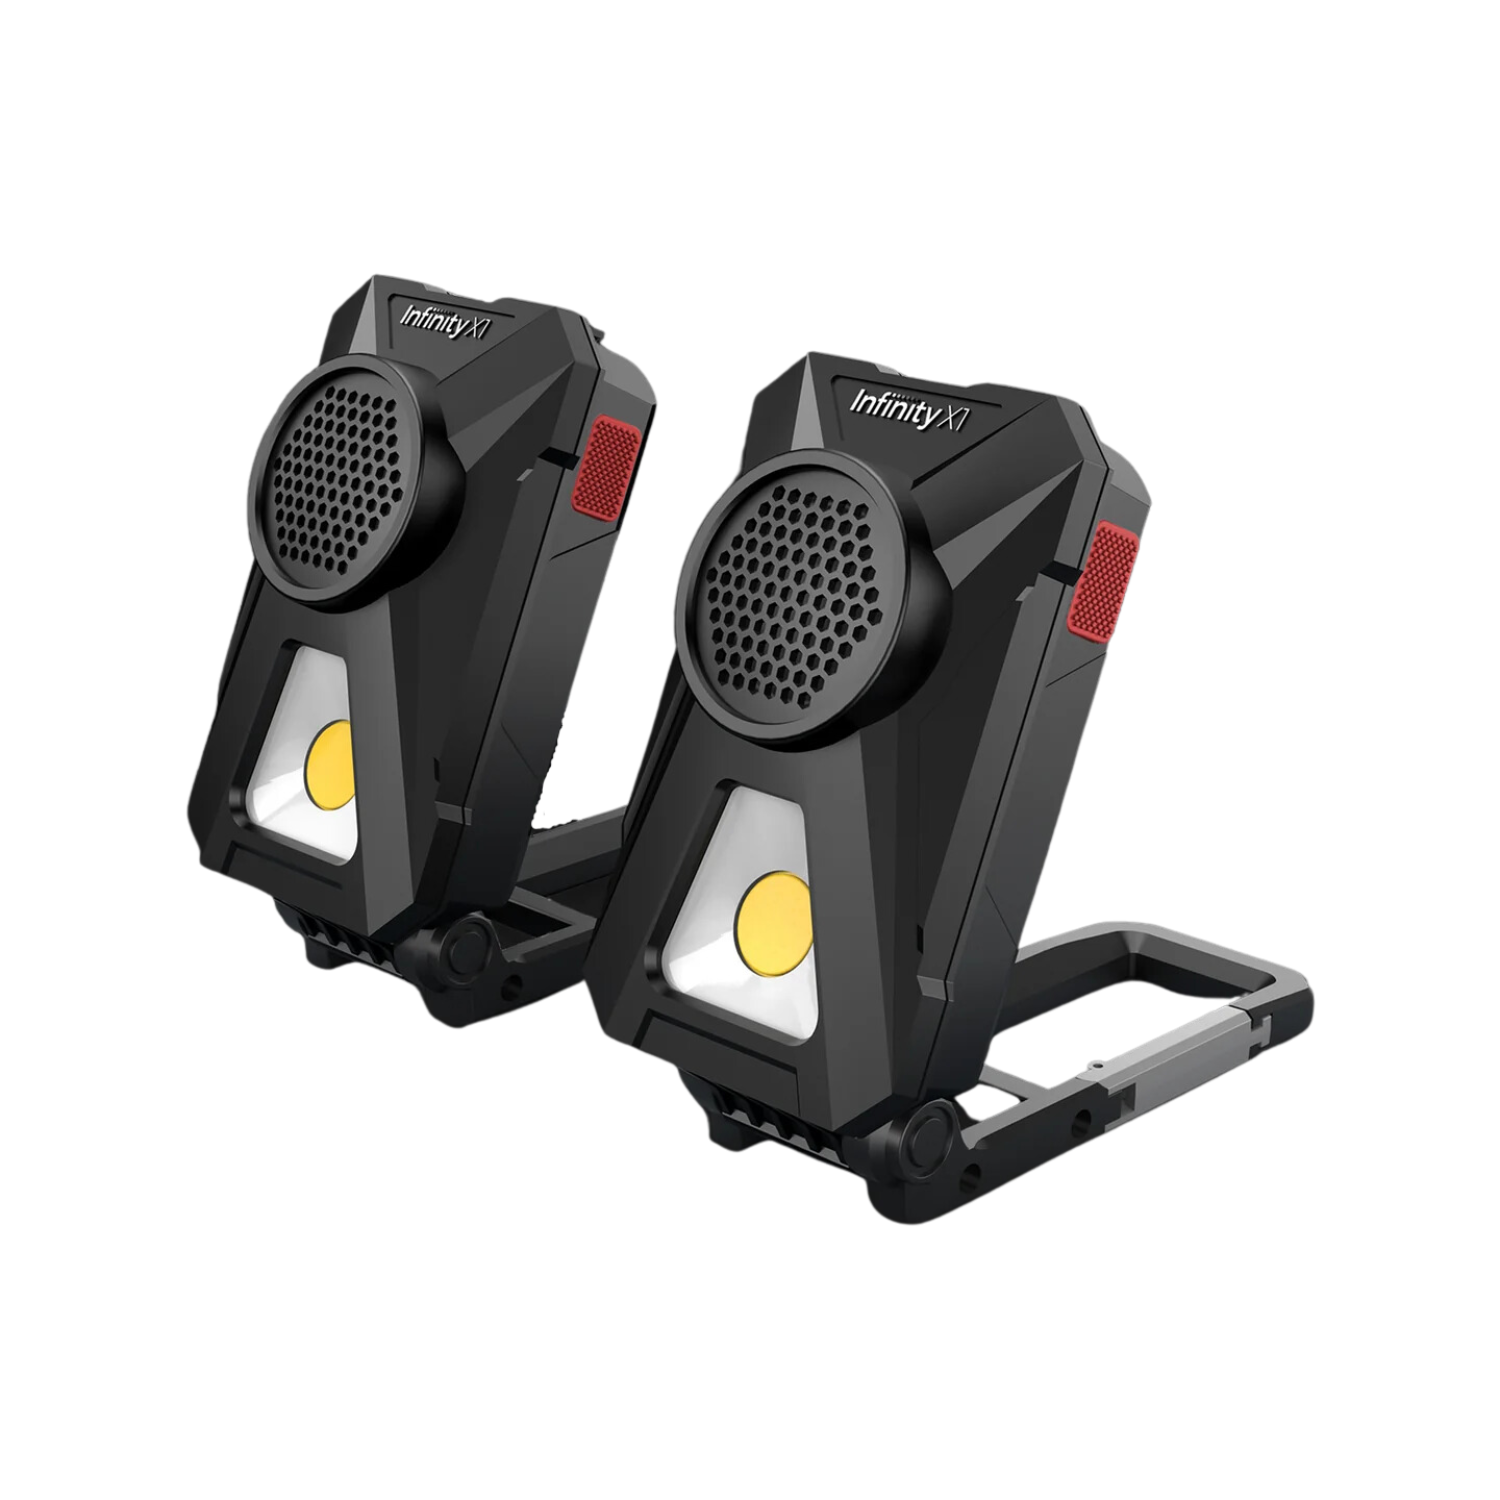 Rechargeable Work Lights (2 Pack) – Infinity X1